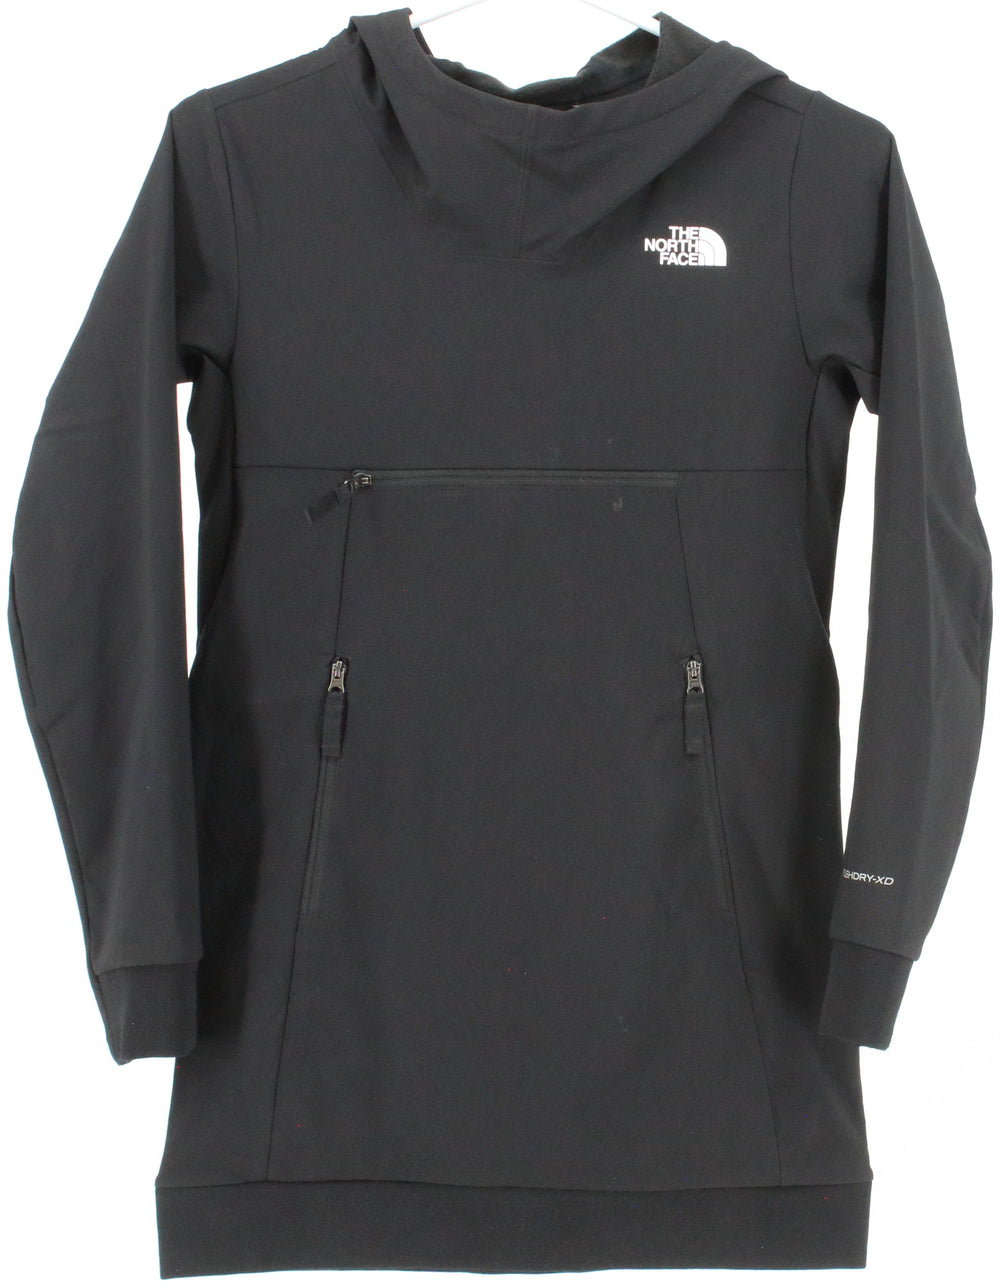 The North Face Flash Dry-XD Black Hooded Long Sleeve Children's Dress